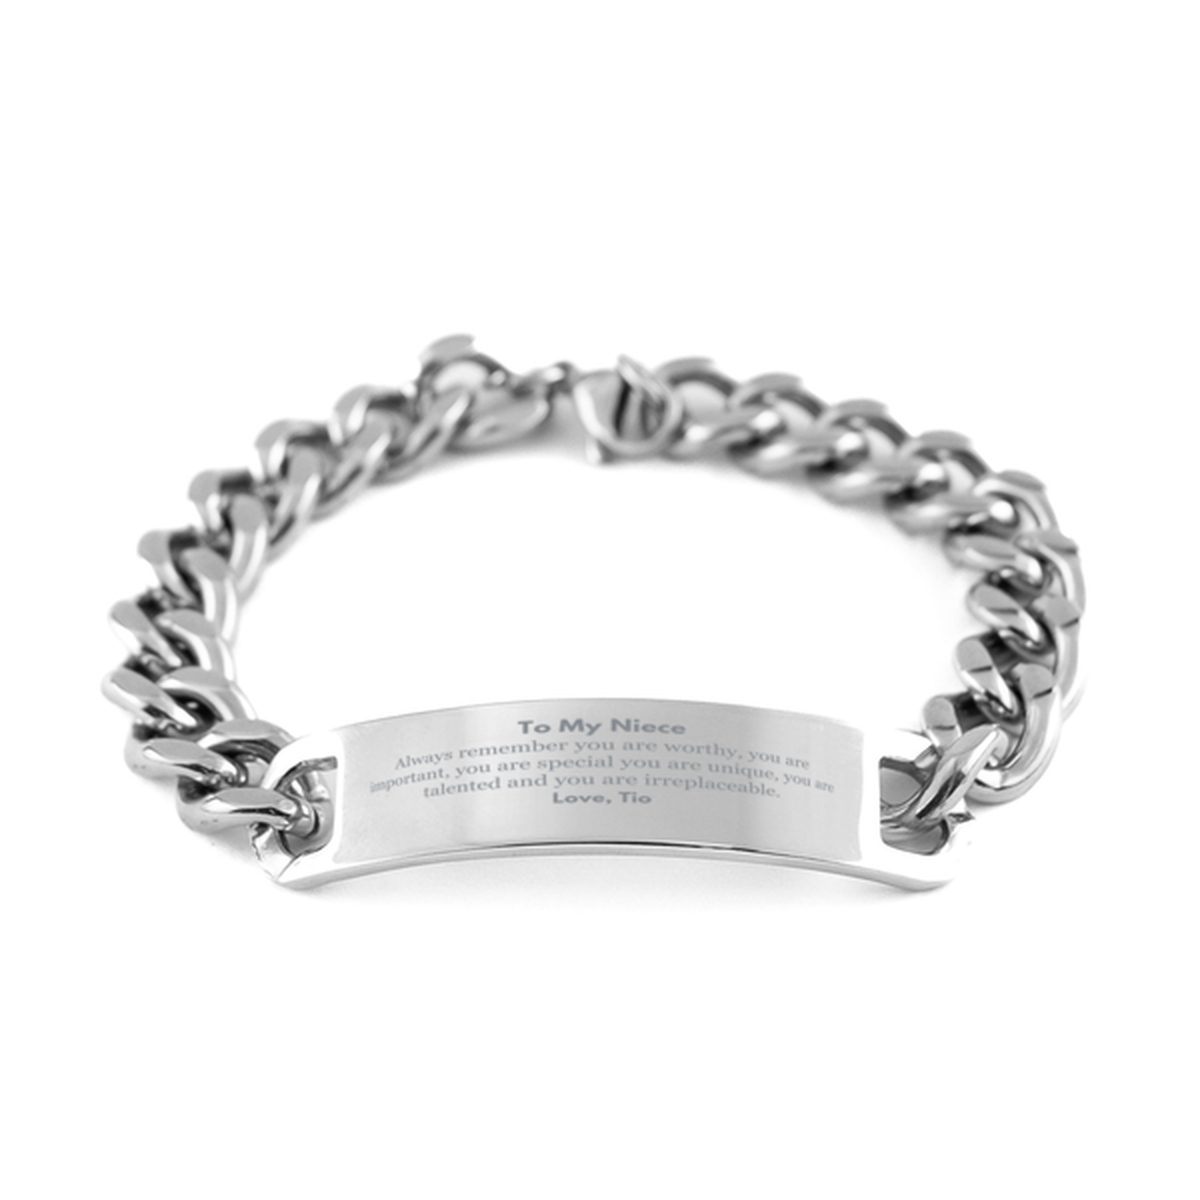 Niece Birthday Gifts from Tio, Inspirational Cuban Chain Stainless Steel Bracelet for Niece Christmas Graduation Gifts for Niece Always remember you are worthy, you are important. Love, Tio